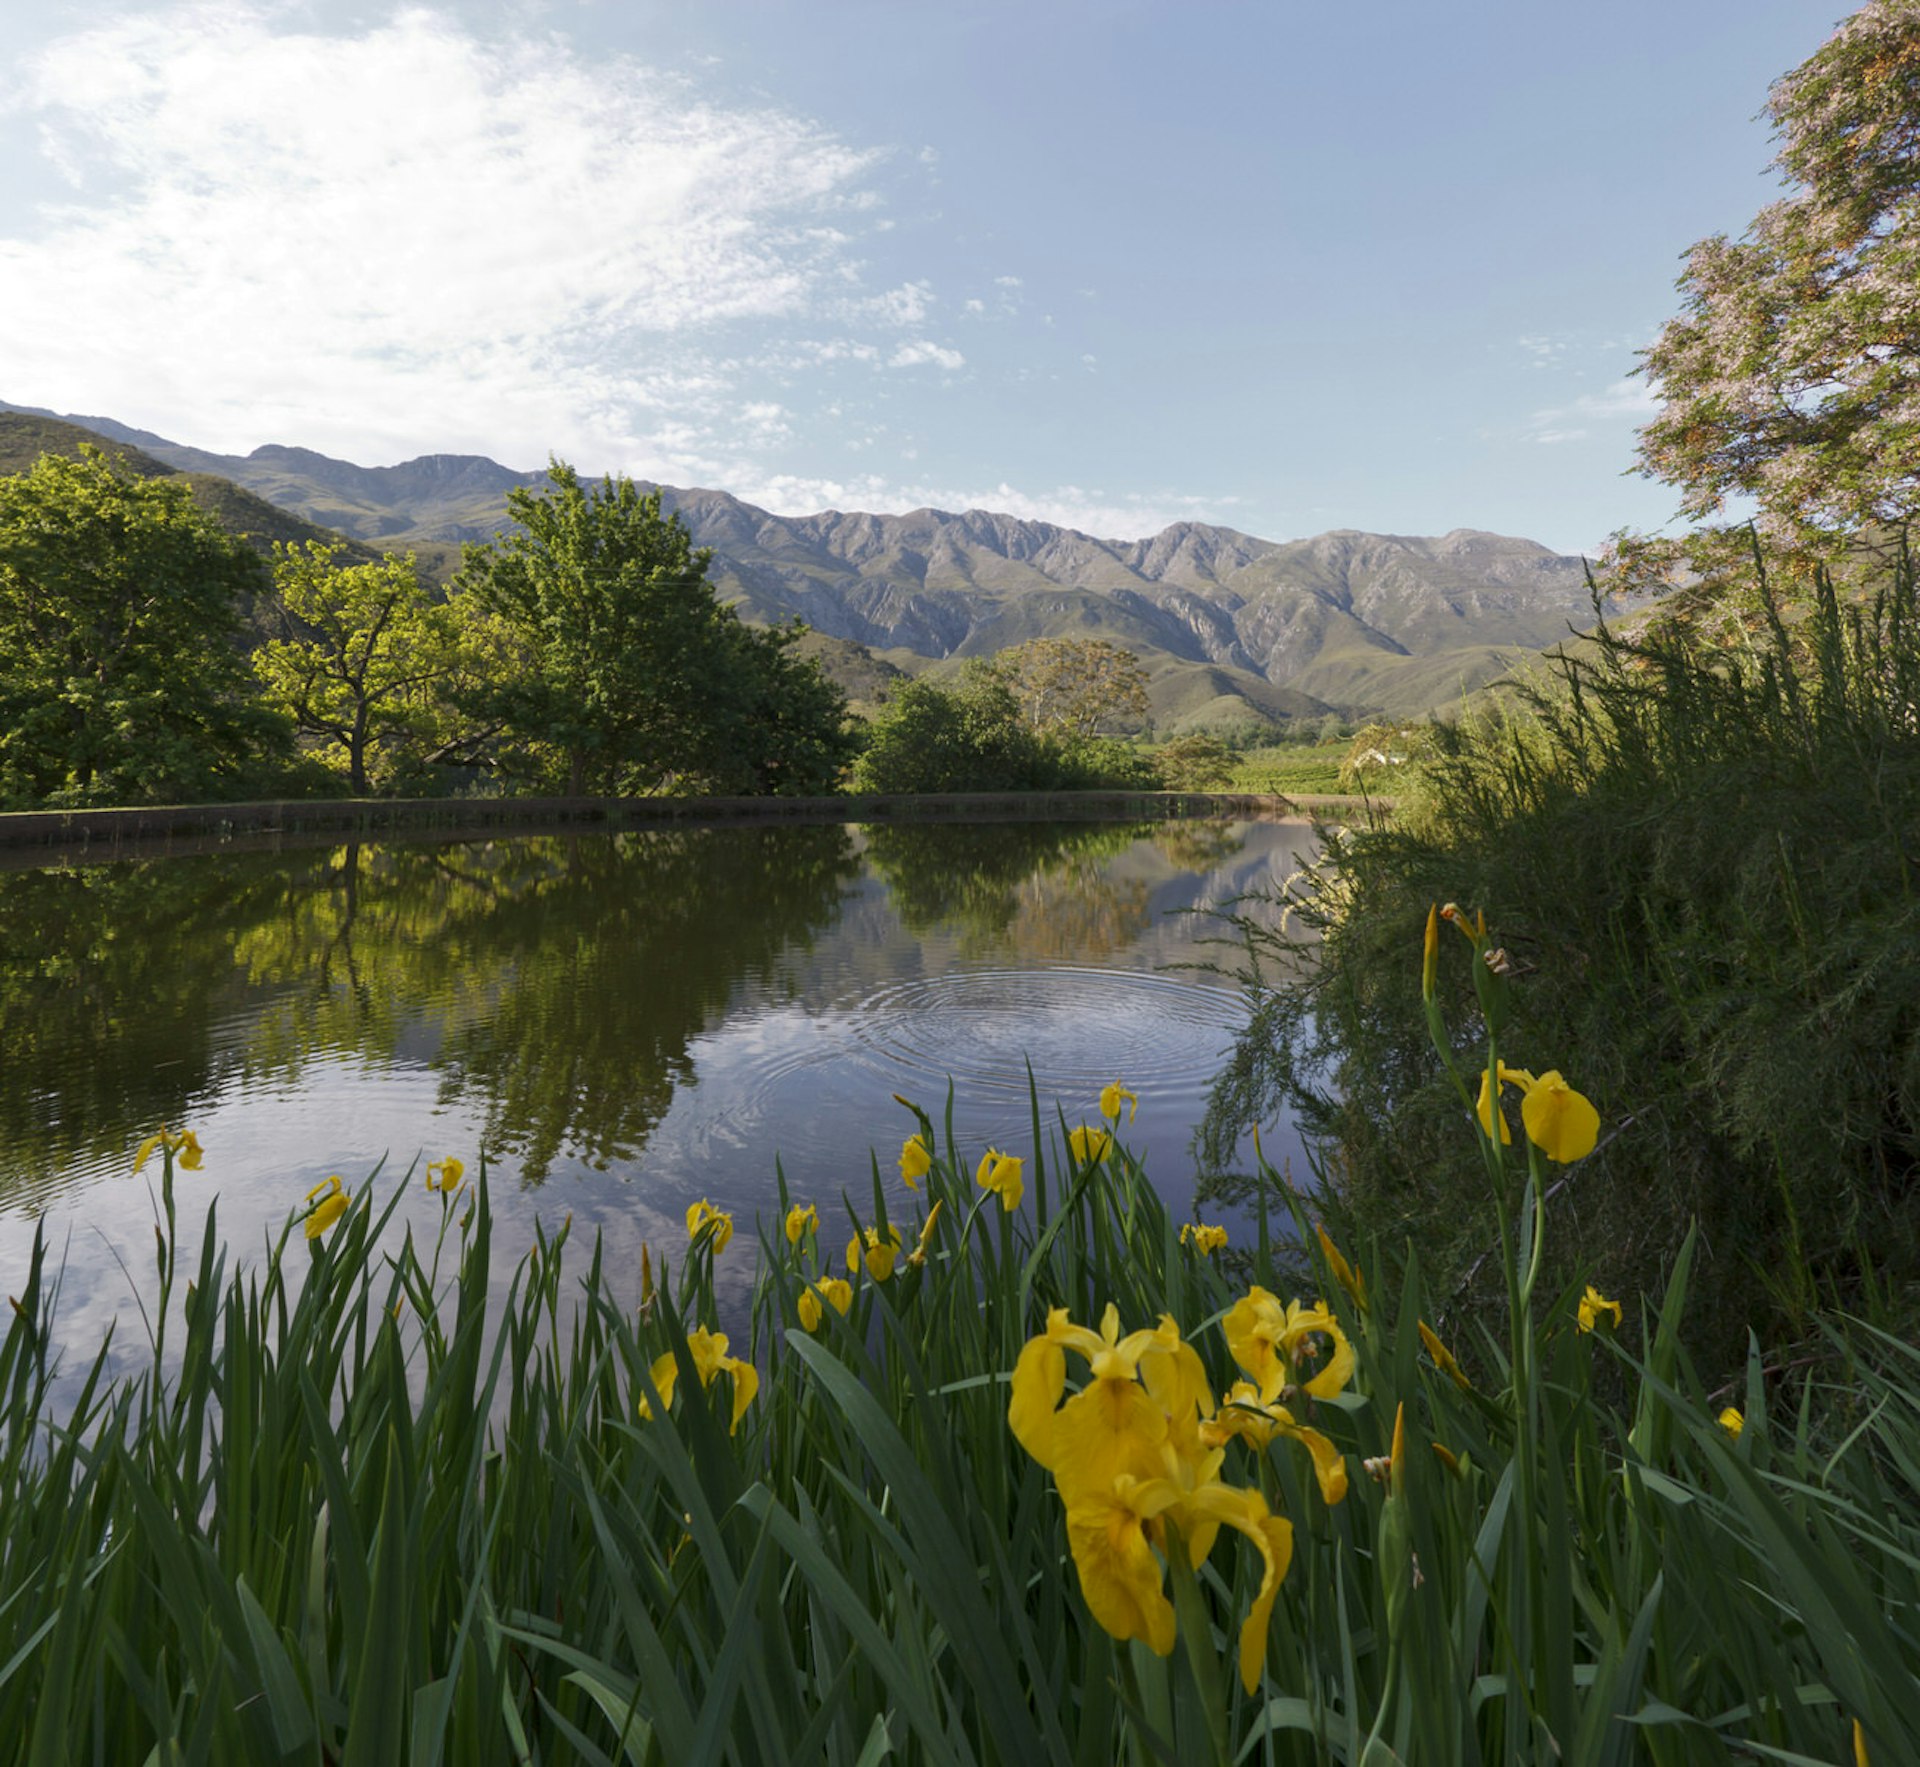 A still river mirrors the trees and mountains on the far bank; in the foreground are some yellow flowers on the bank; circular ripples are seen close to the near bank, from a boy fishing in this Winelands area